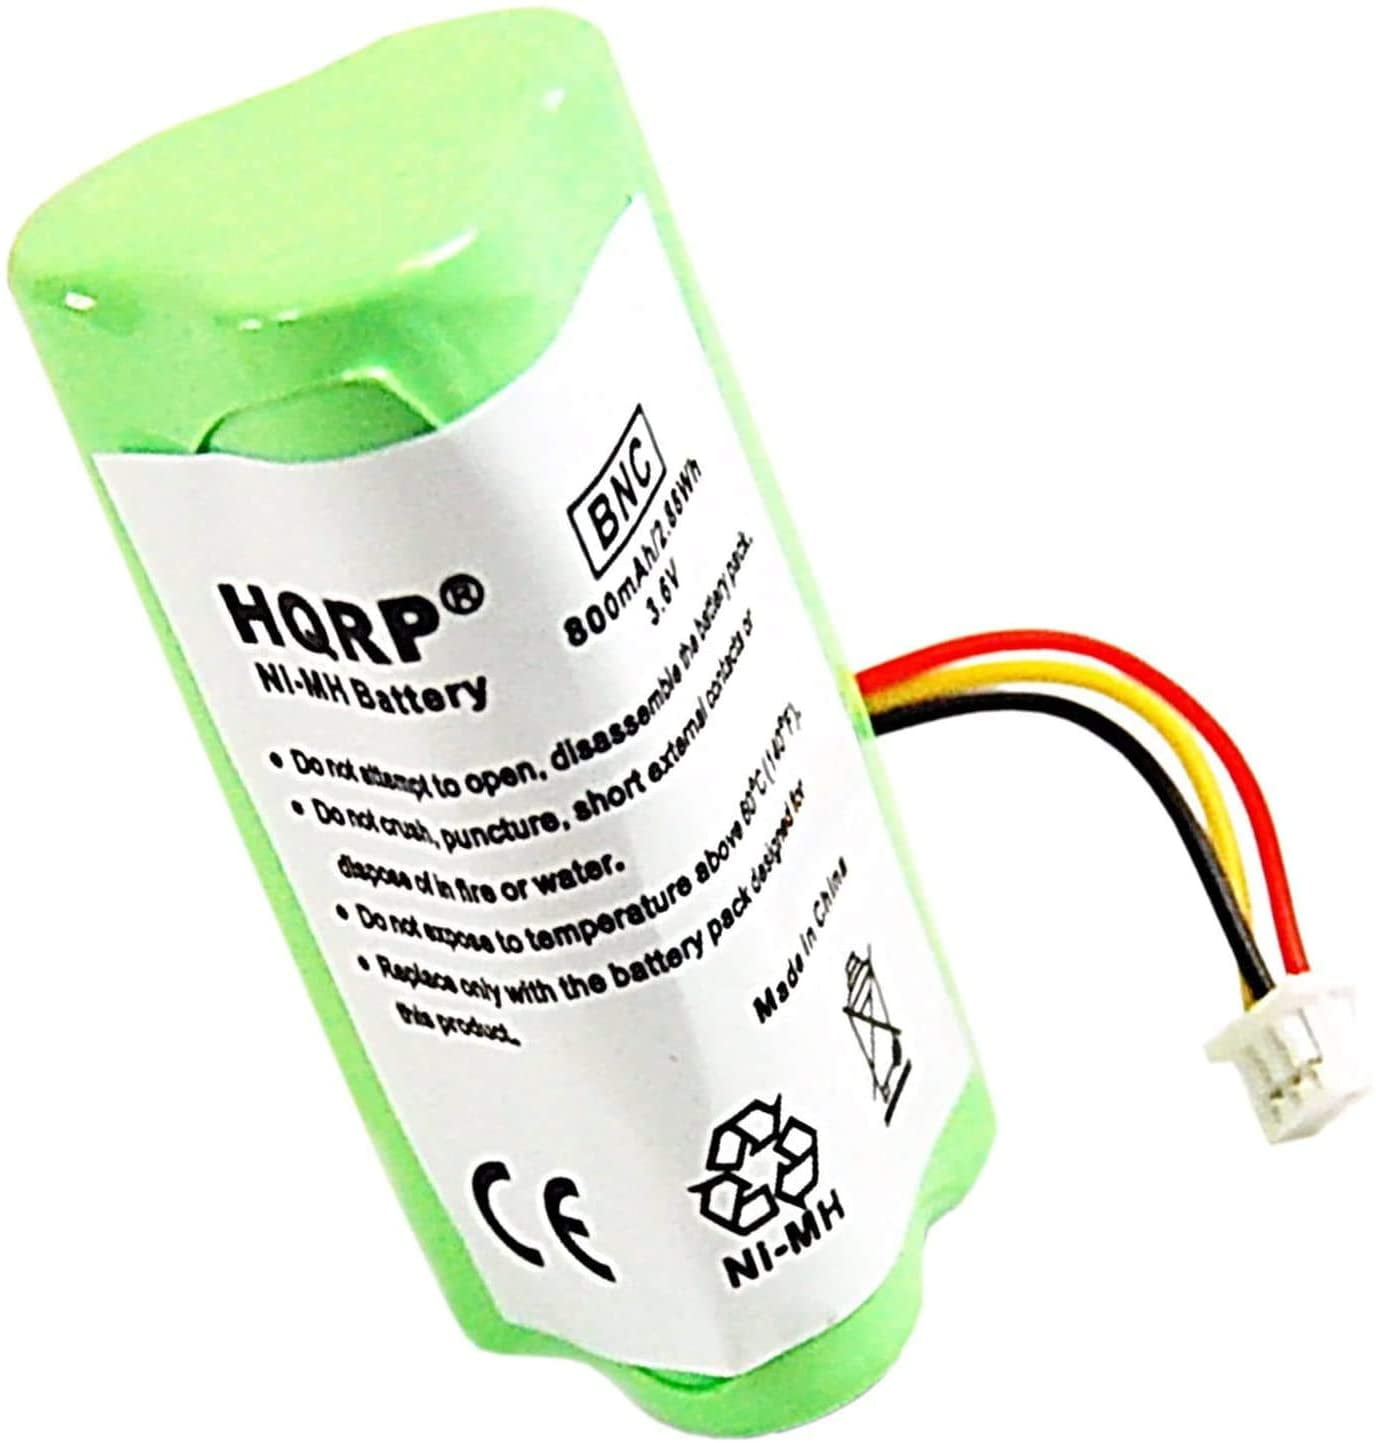 HQRP Battery Pack Compatible with Motorola Symbol 82-67705-01 BTRY-LS42RAAOE-01 K35466 Replacement fits Cordless Bar Code Scanner Plus HQRP Coaster 